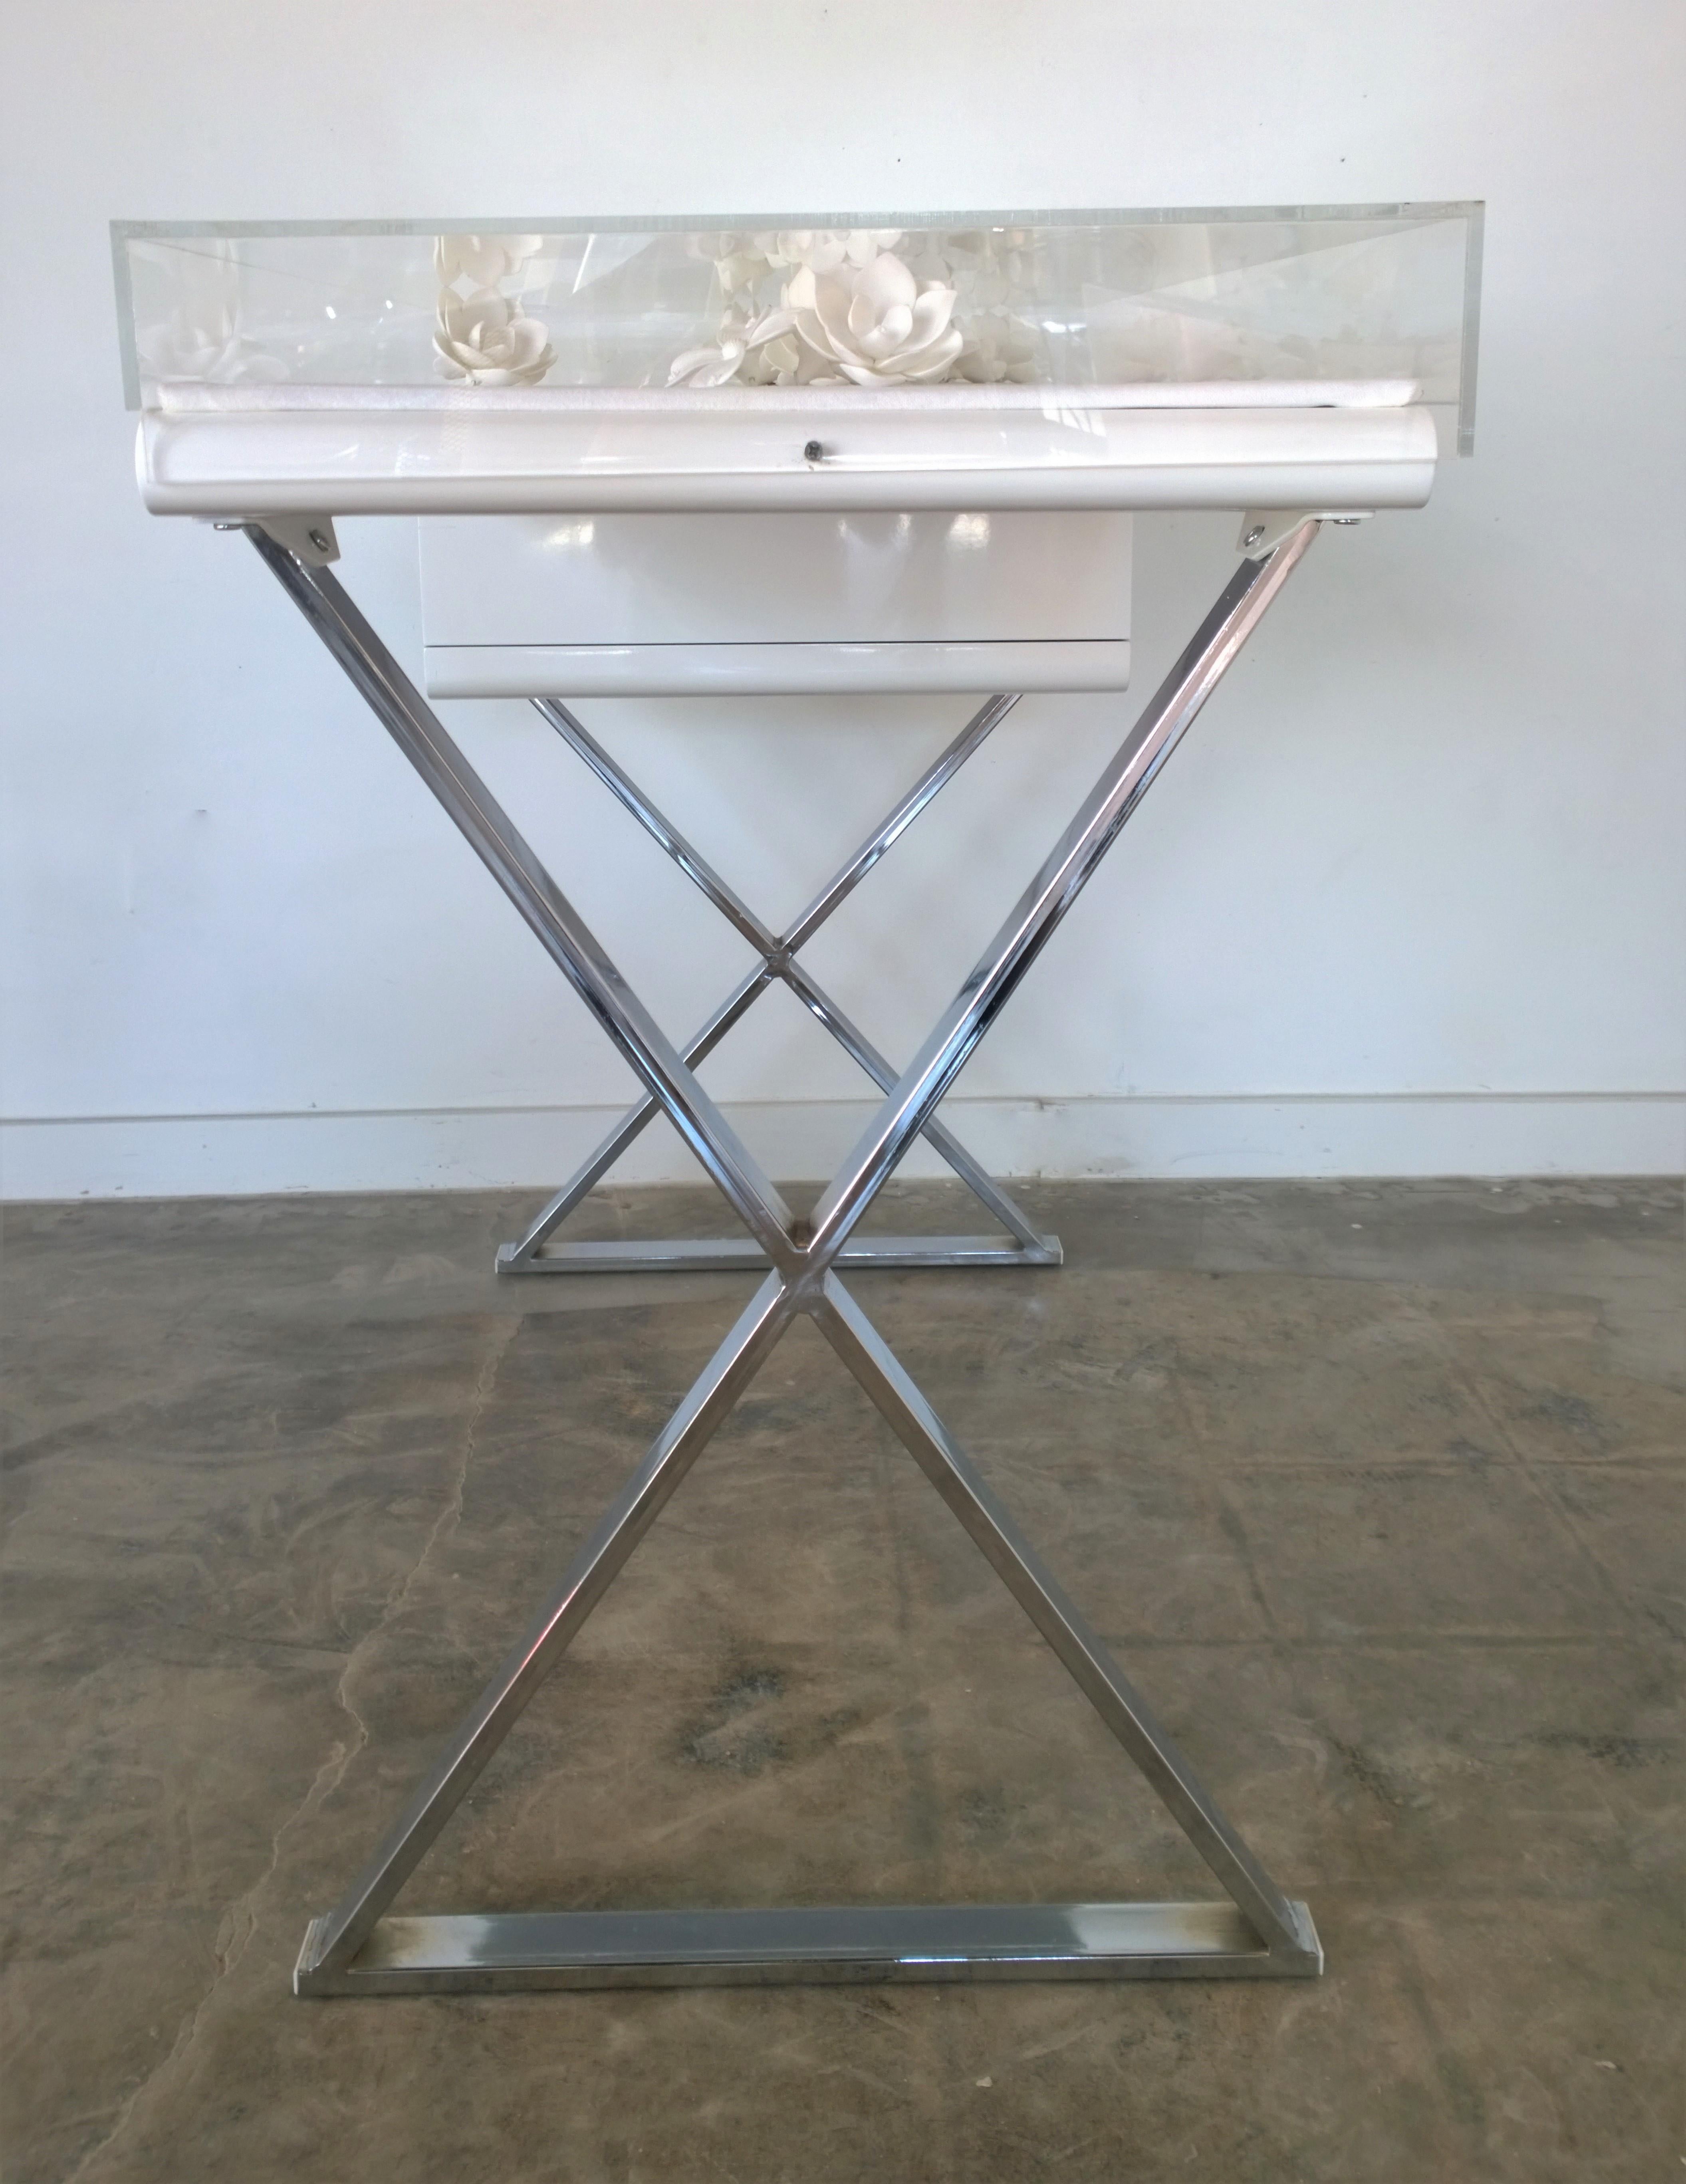 Lacquered Lucite Object D'art White Lacquer & Metal X Base Desk by AMK for Patricia Kagan